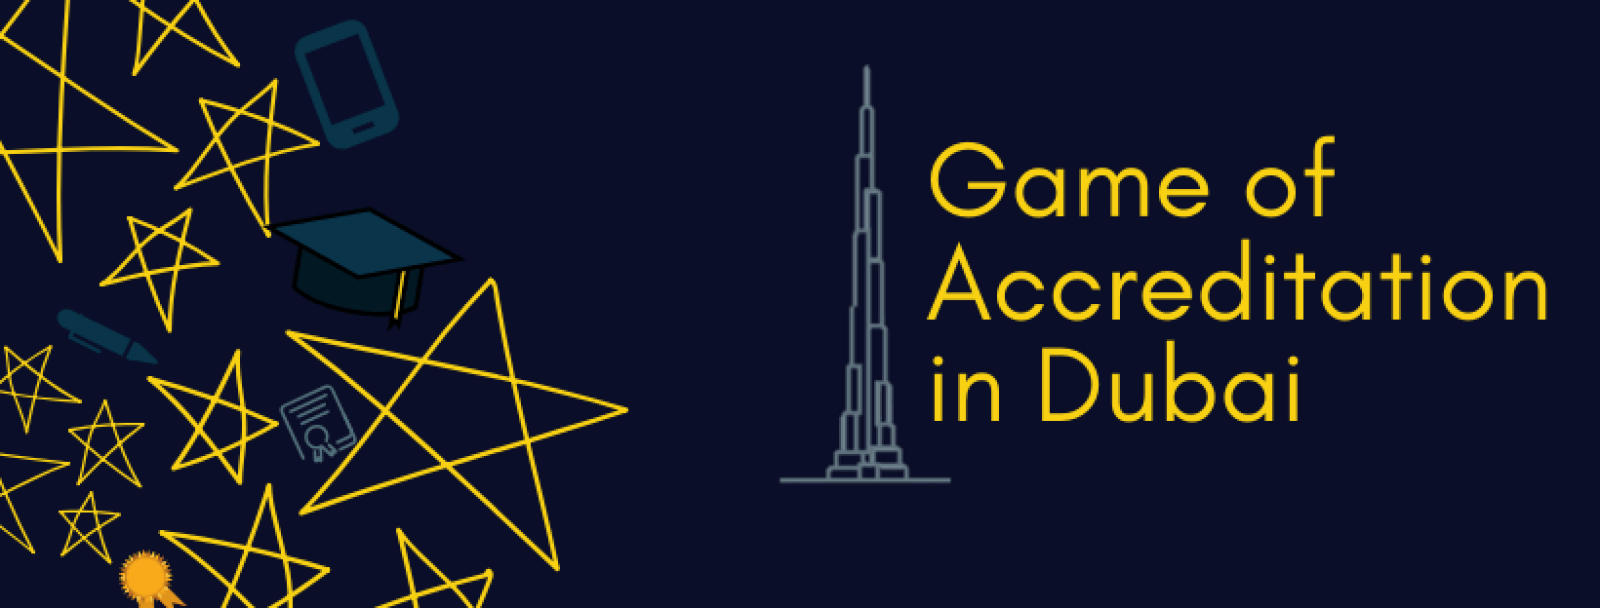 Game of Accreditation-How Dubai is 10 years ahead in revolutionizing its higher education sector